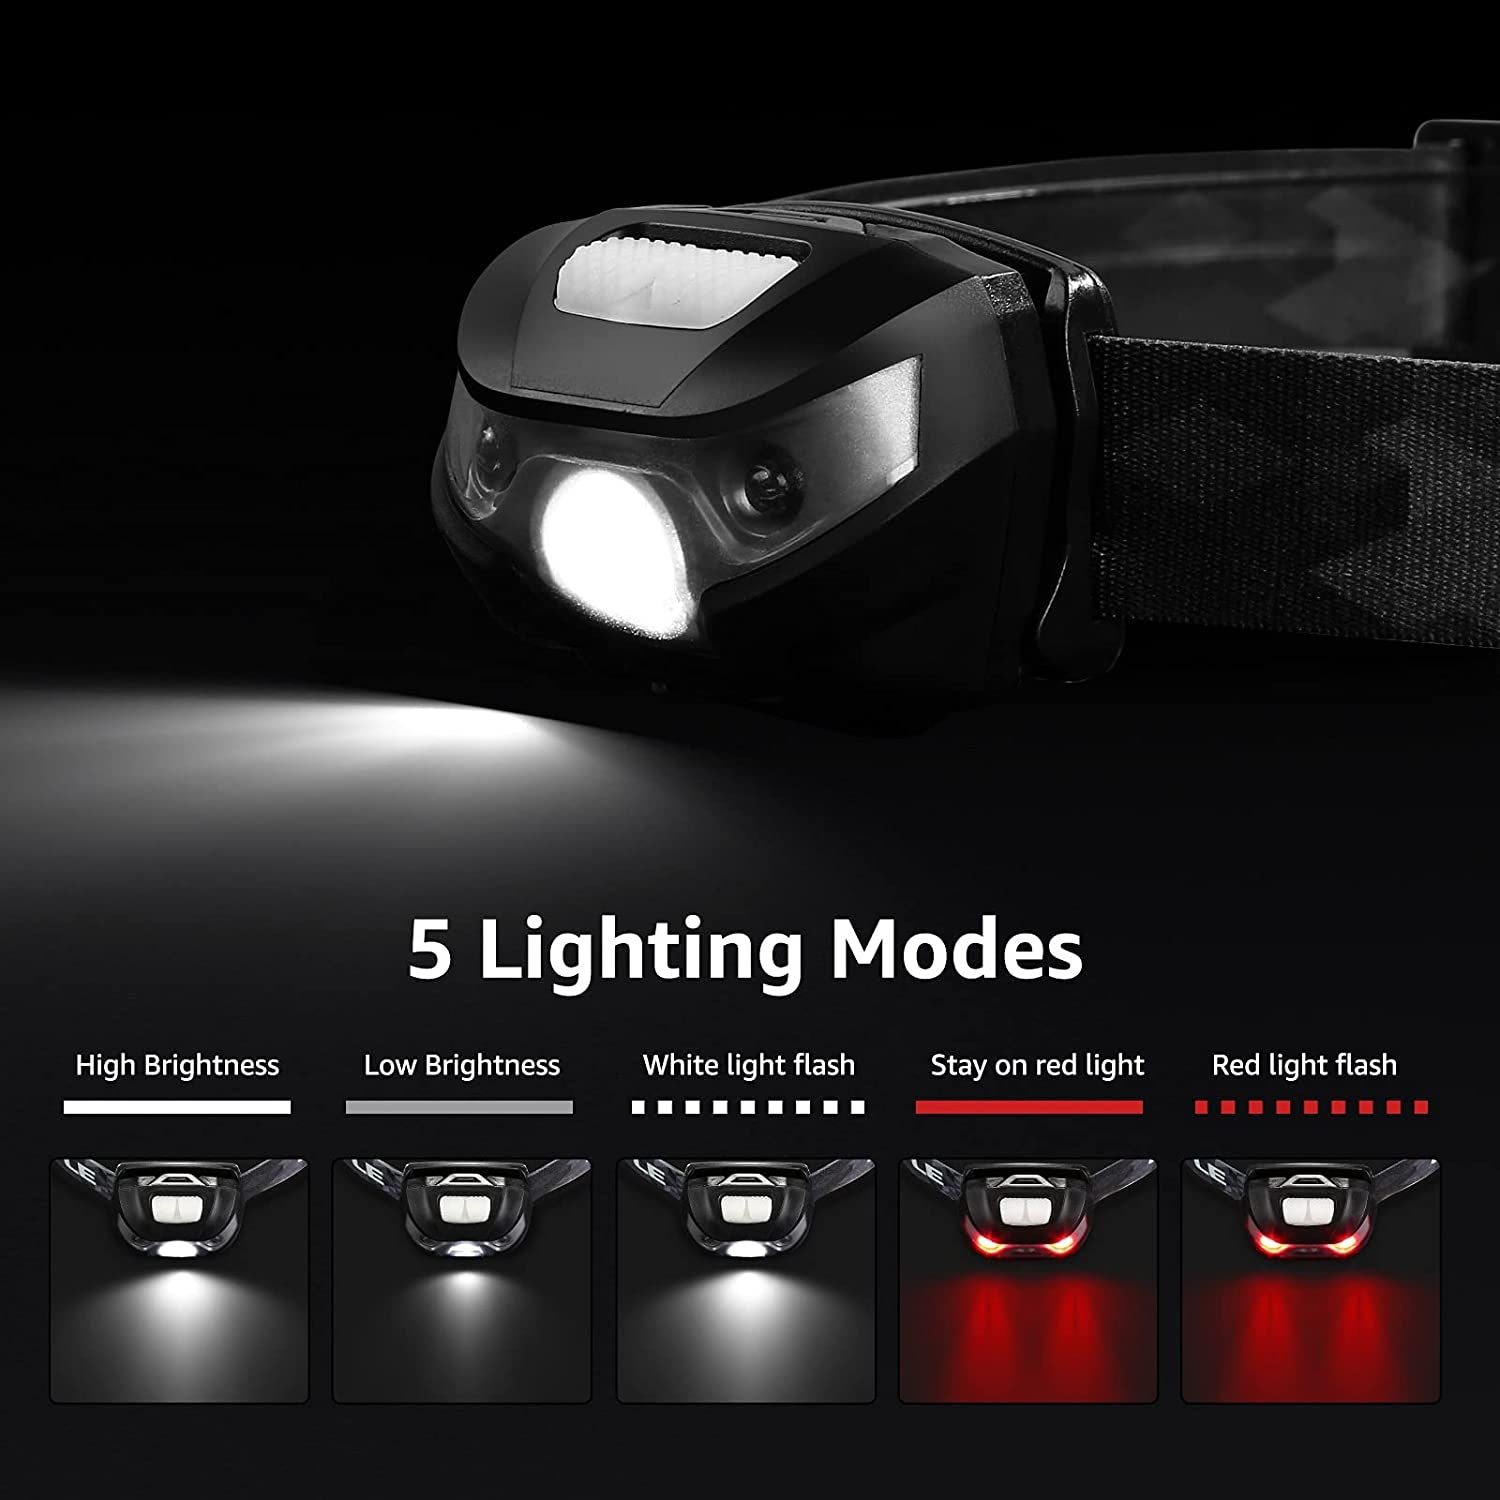 HydraGlow Pro: Rechargeable LED Head Torch with 5 Modes, Waterproof De
USB Rechargeable: With a built-in 1200mAh rechargeable battery, this head torch can be charged by various USB devices, making it environmentally friendly and cost-e